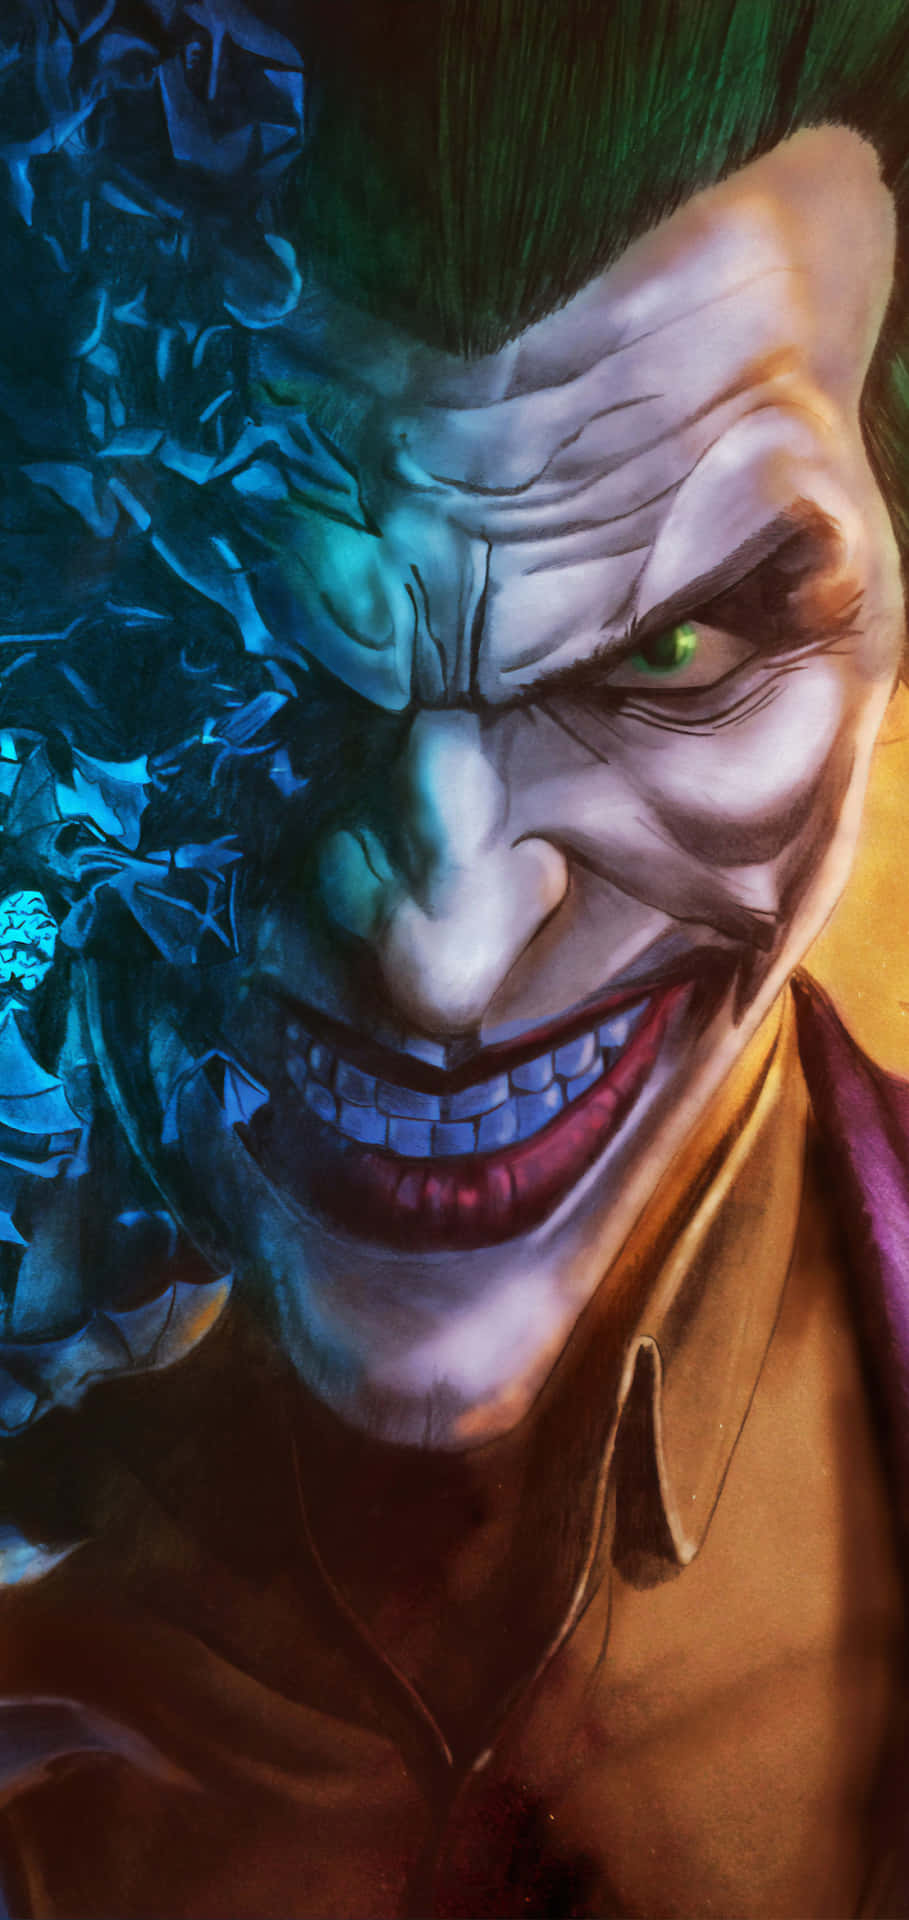 The Man Behind The Laughter: The Joker